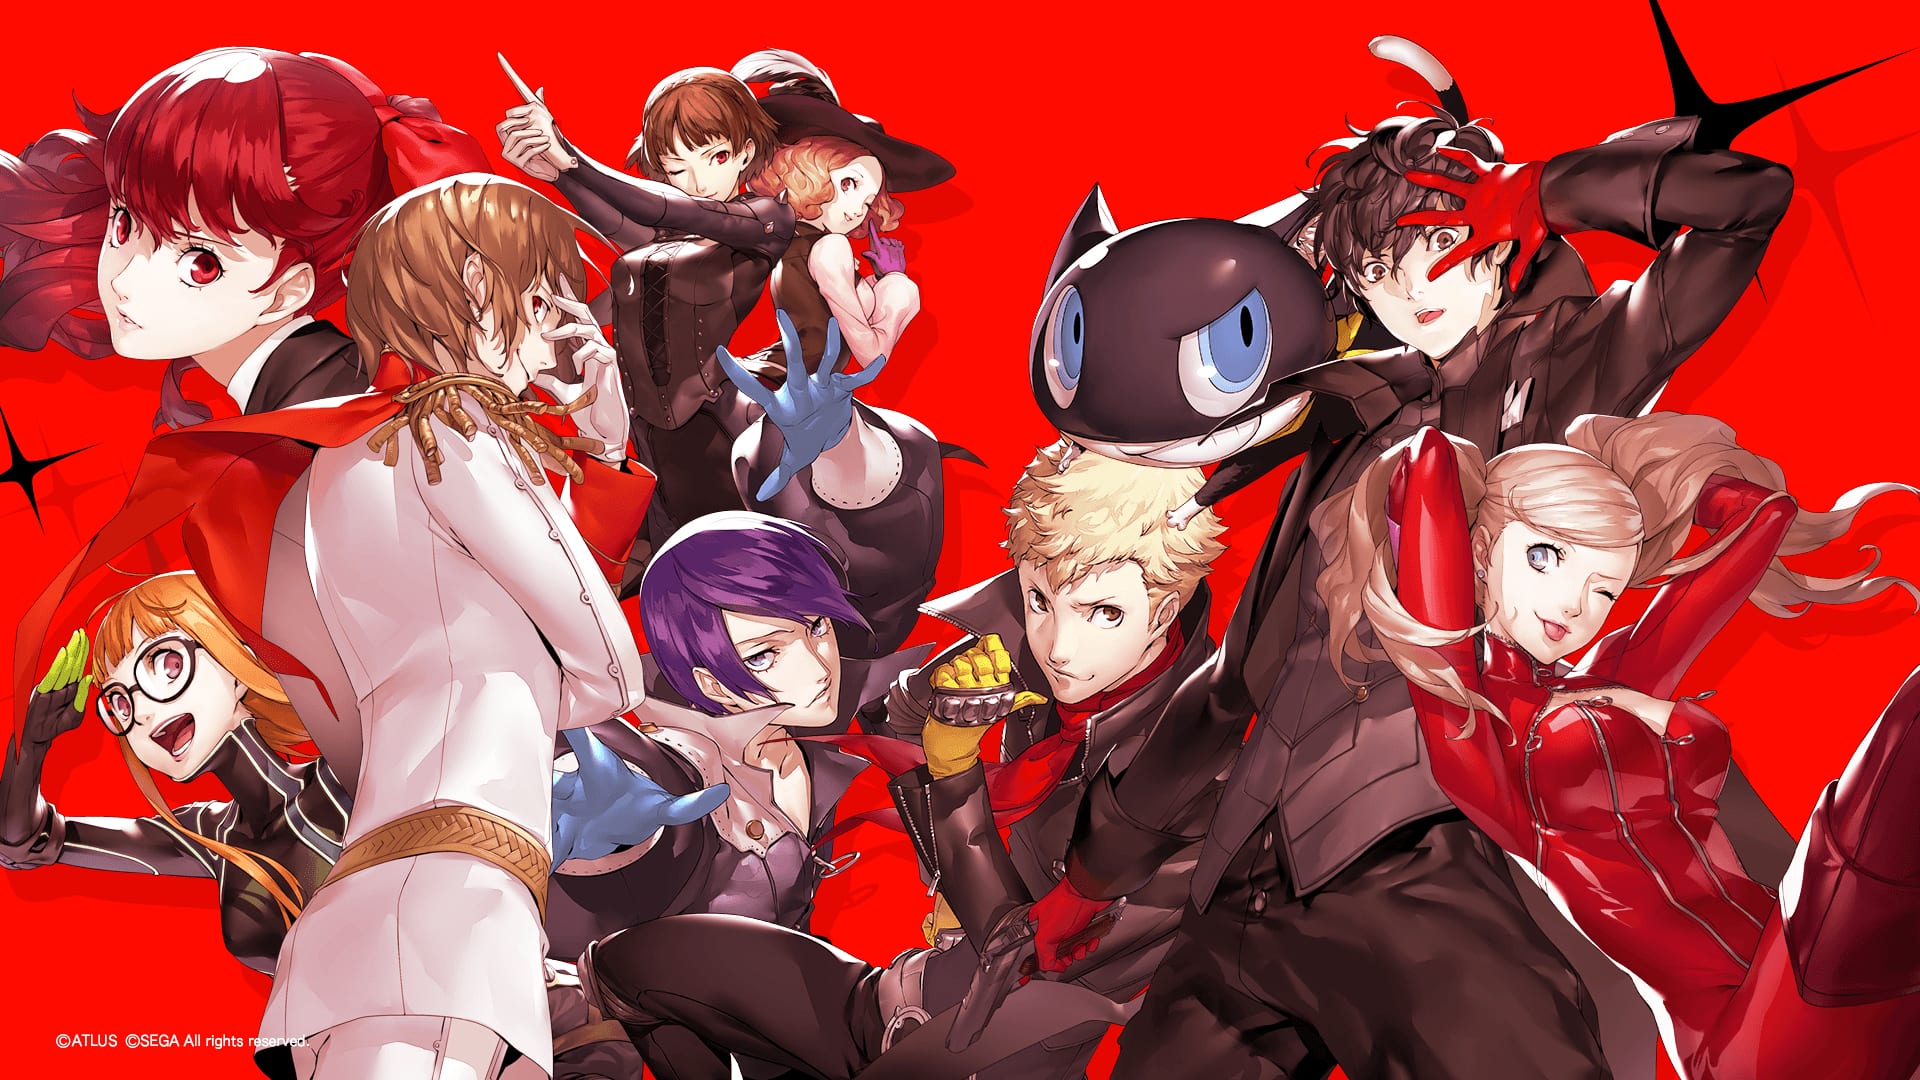 4K & HD Persona 5 Wallpapers You Need